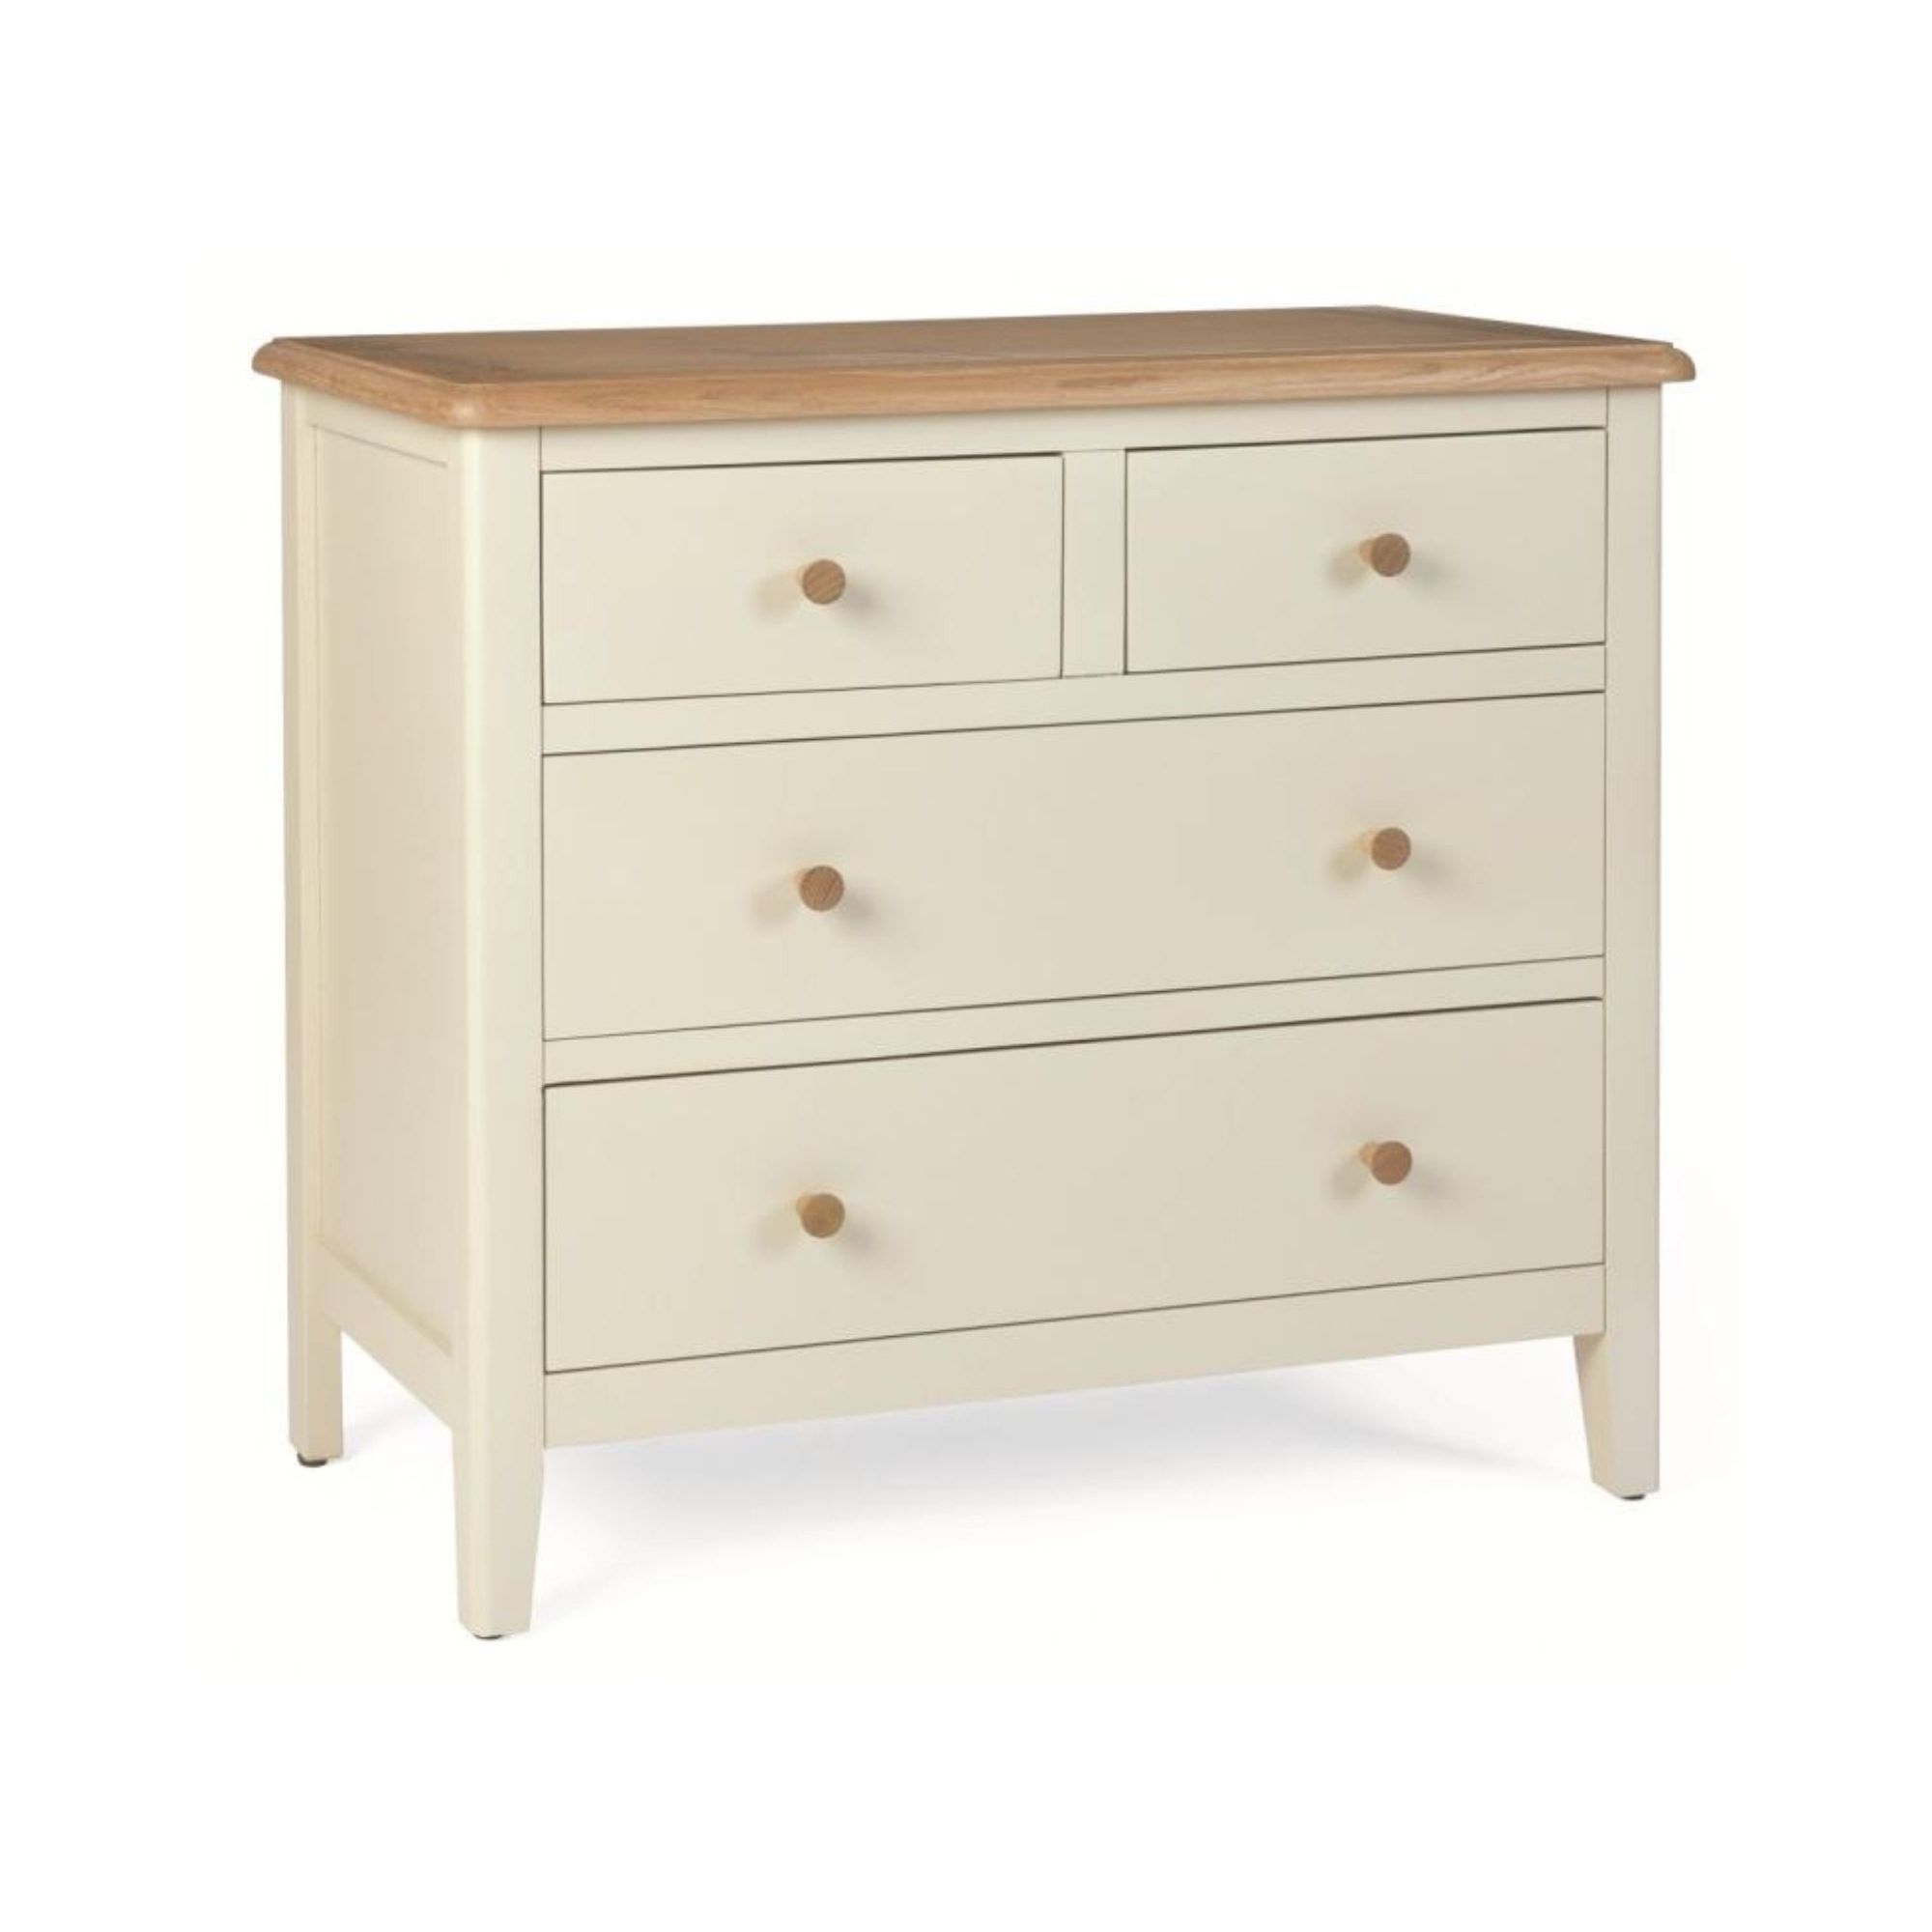 Kelburn Furniture Cottage Painted 2 over 2 Drawer Chest at Tesco Direct